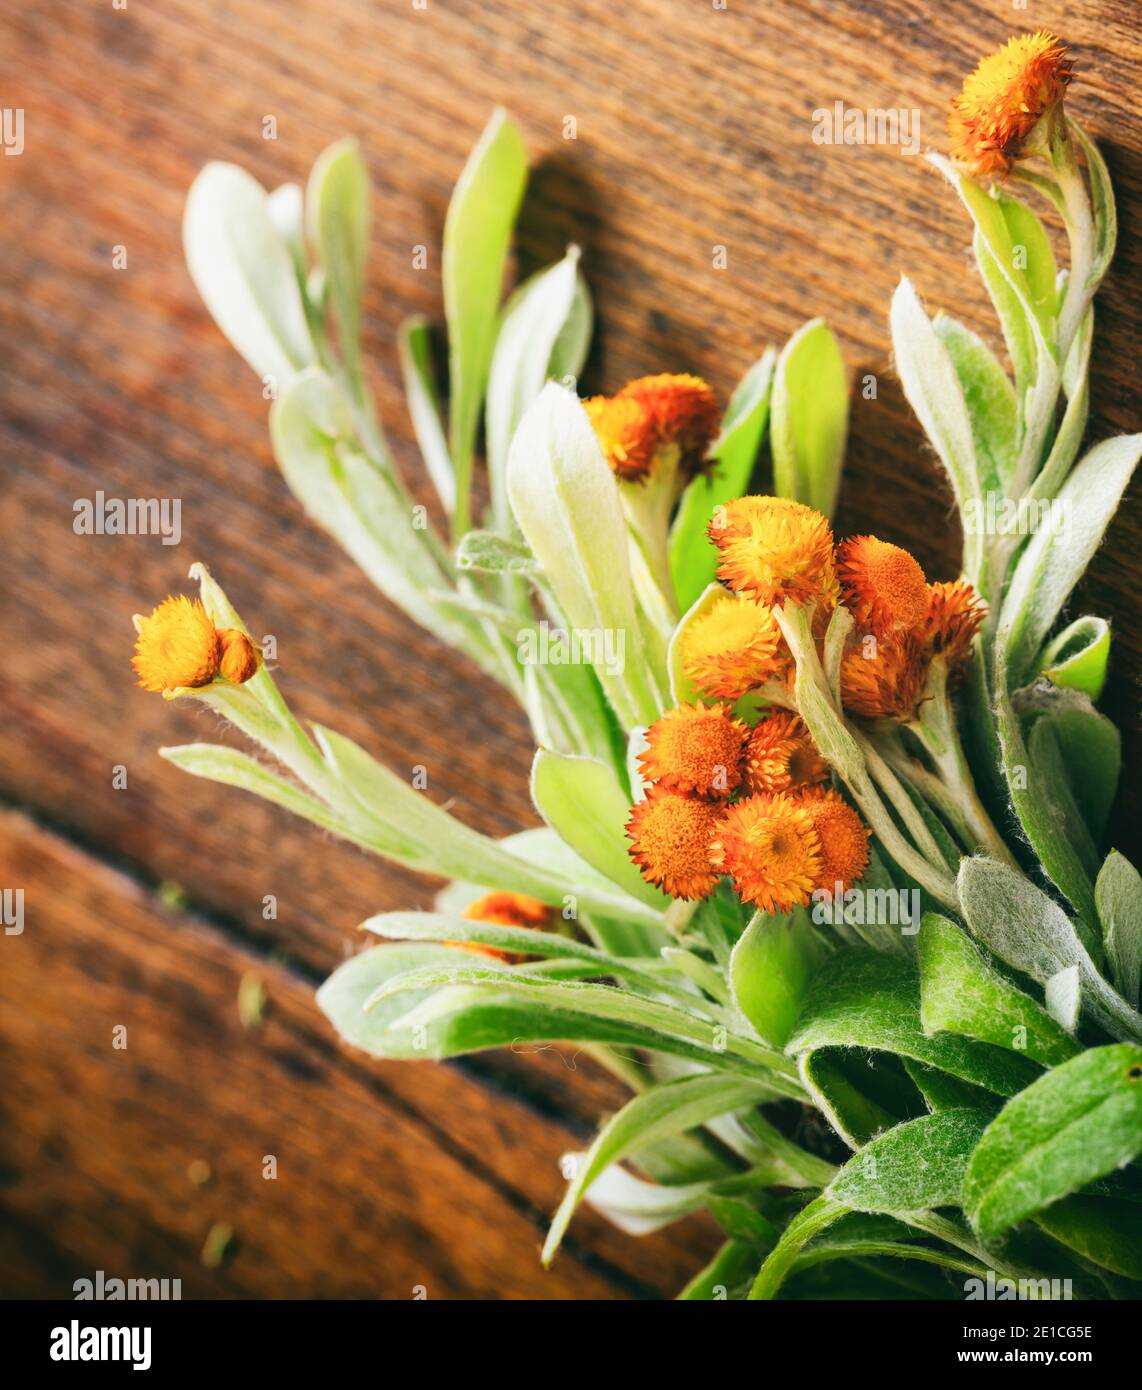 Fresh helichrysum leaves and blossoms on wooden background, closeup view. Helichrysum orientale herb, also known as everlasting and immortelle Stock Photo